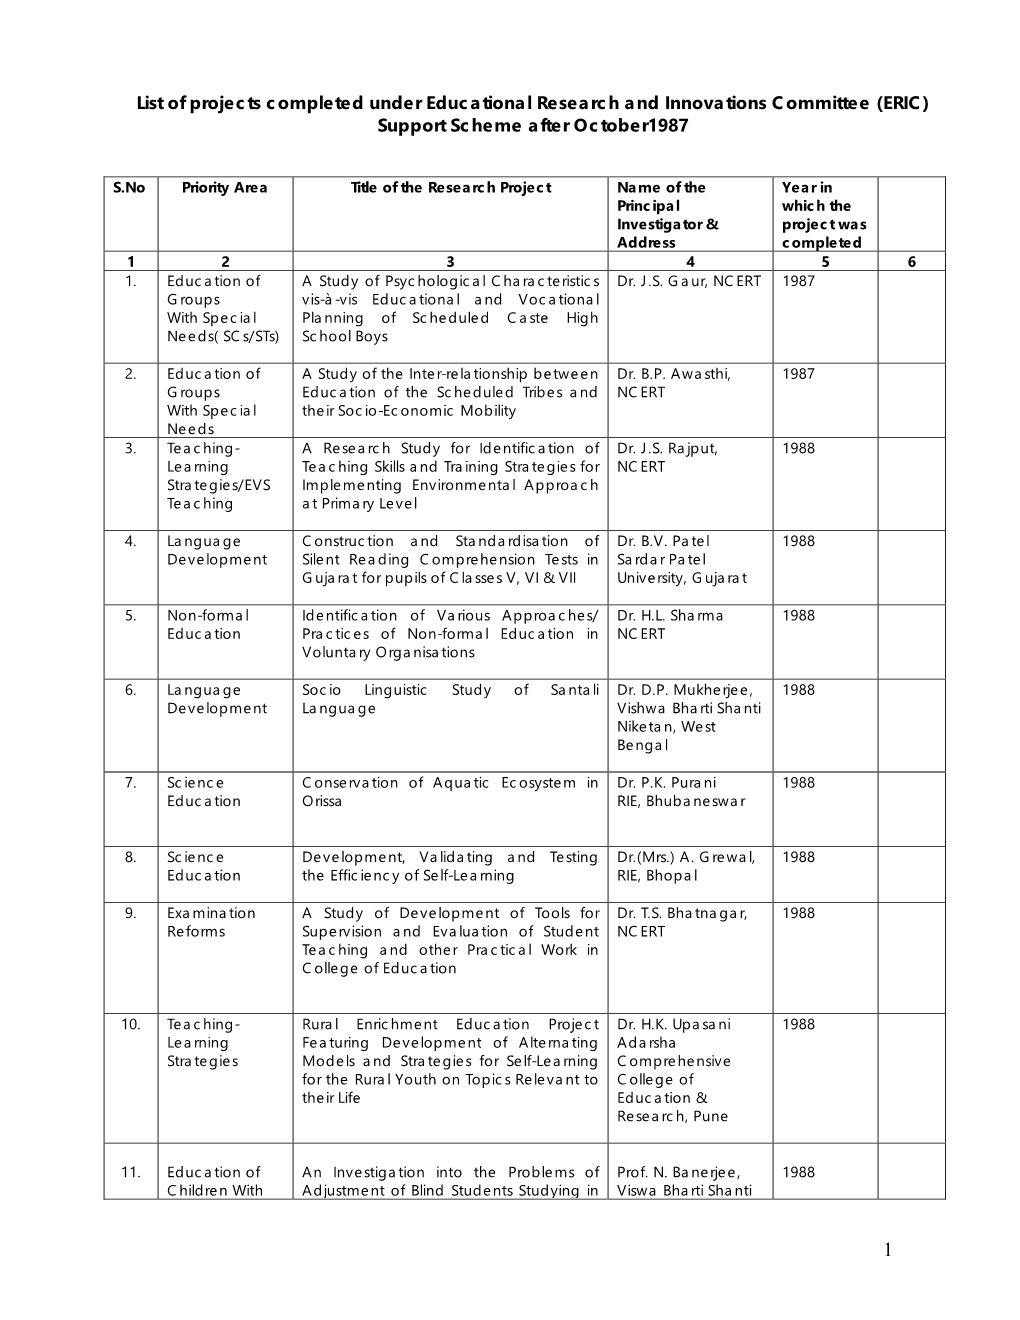 List of Projects Completed Under Educational Research and Innovations Committee (ERIC) Support Scheme After October1987